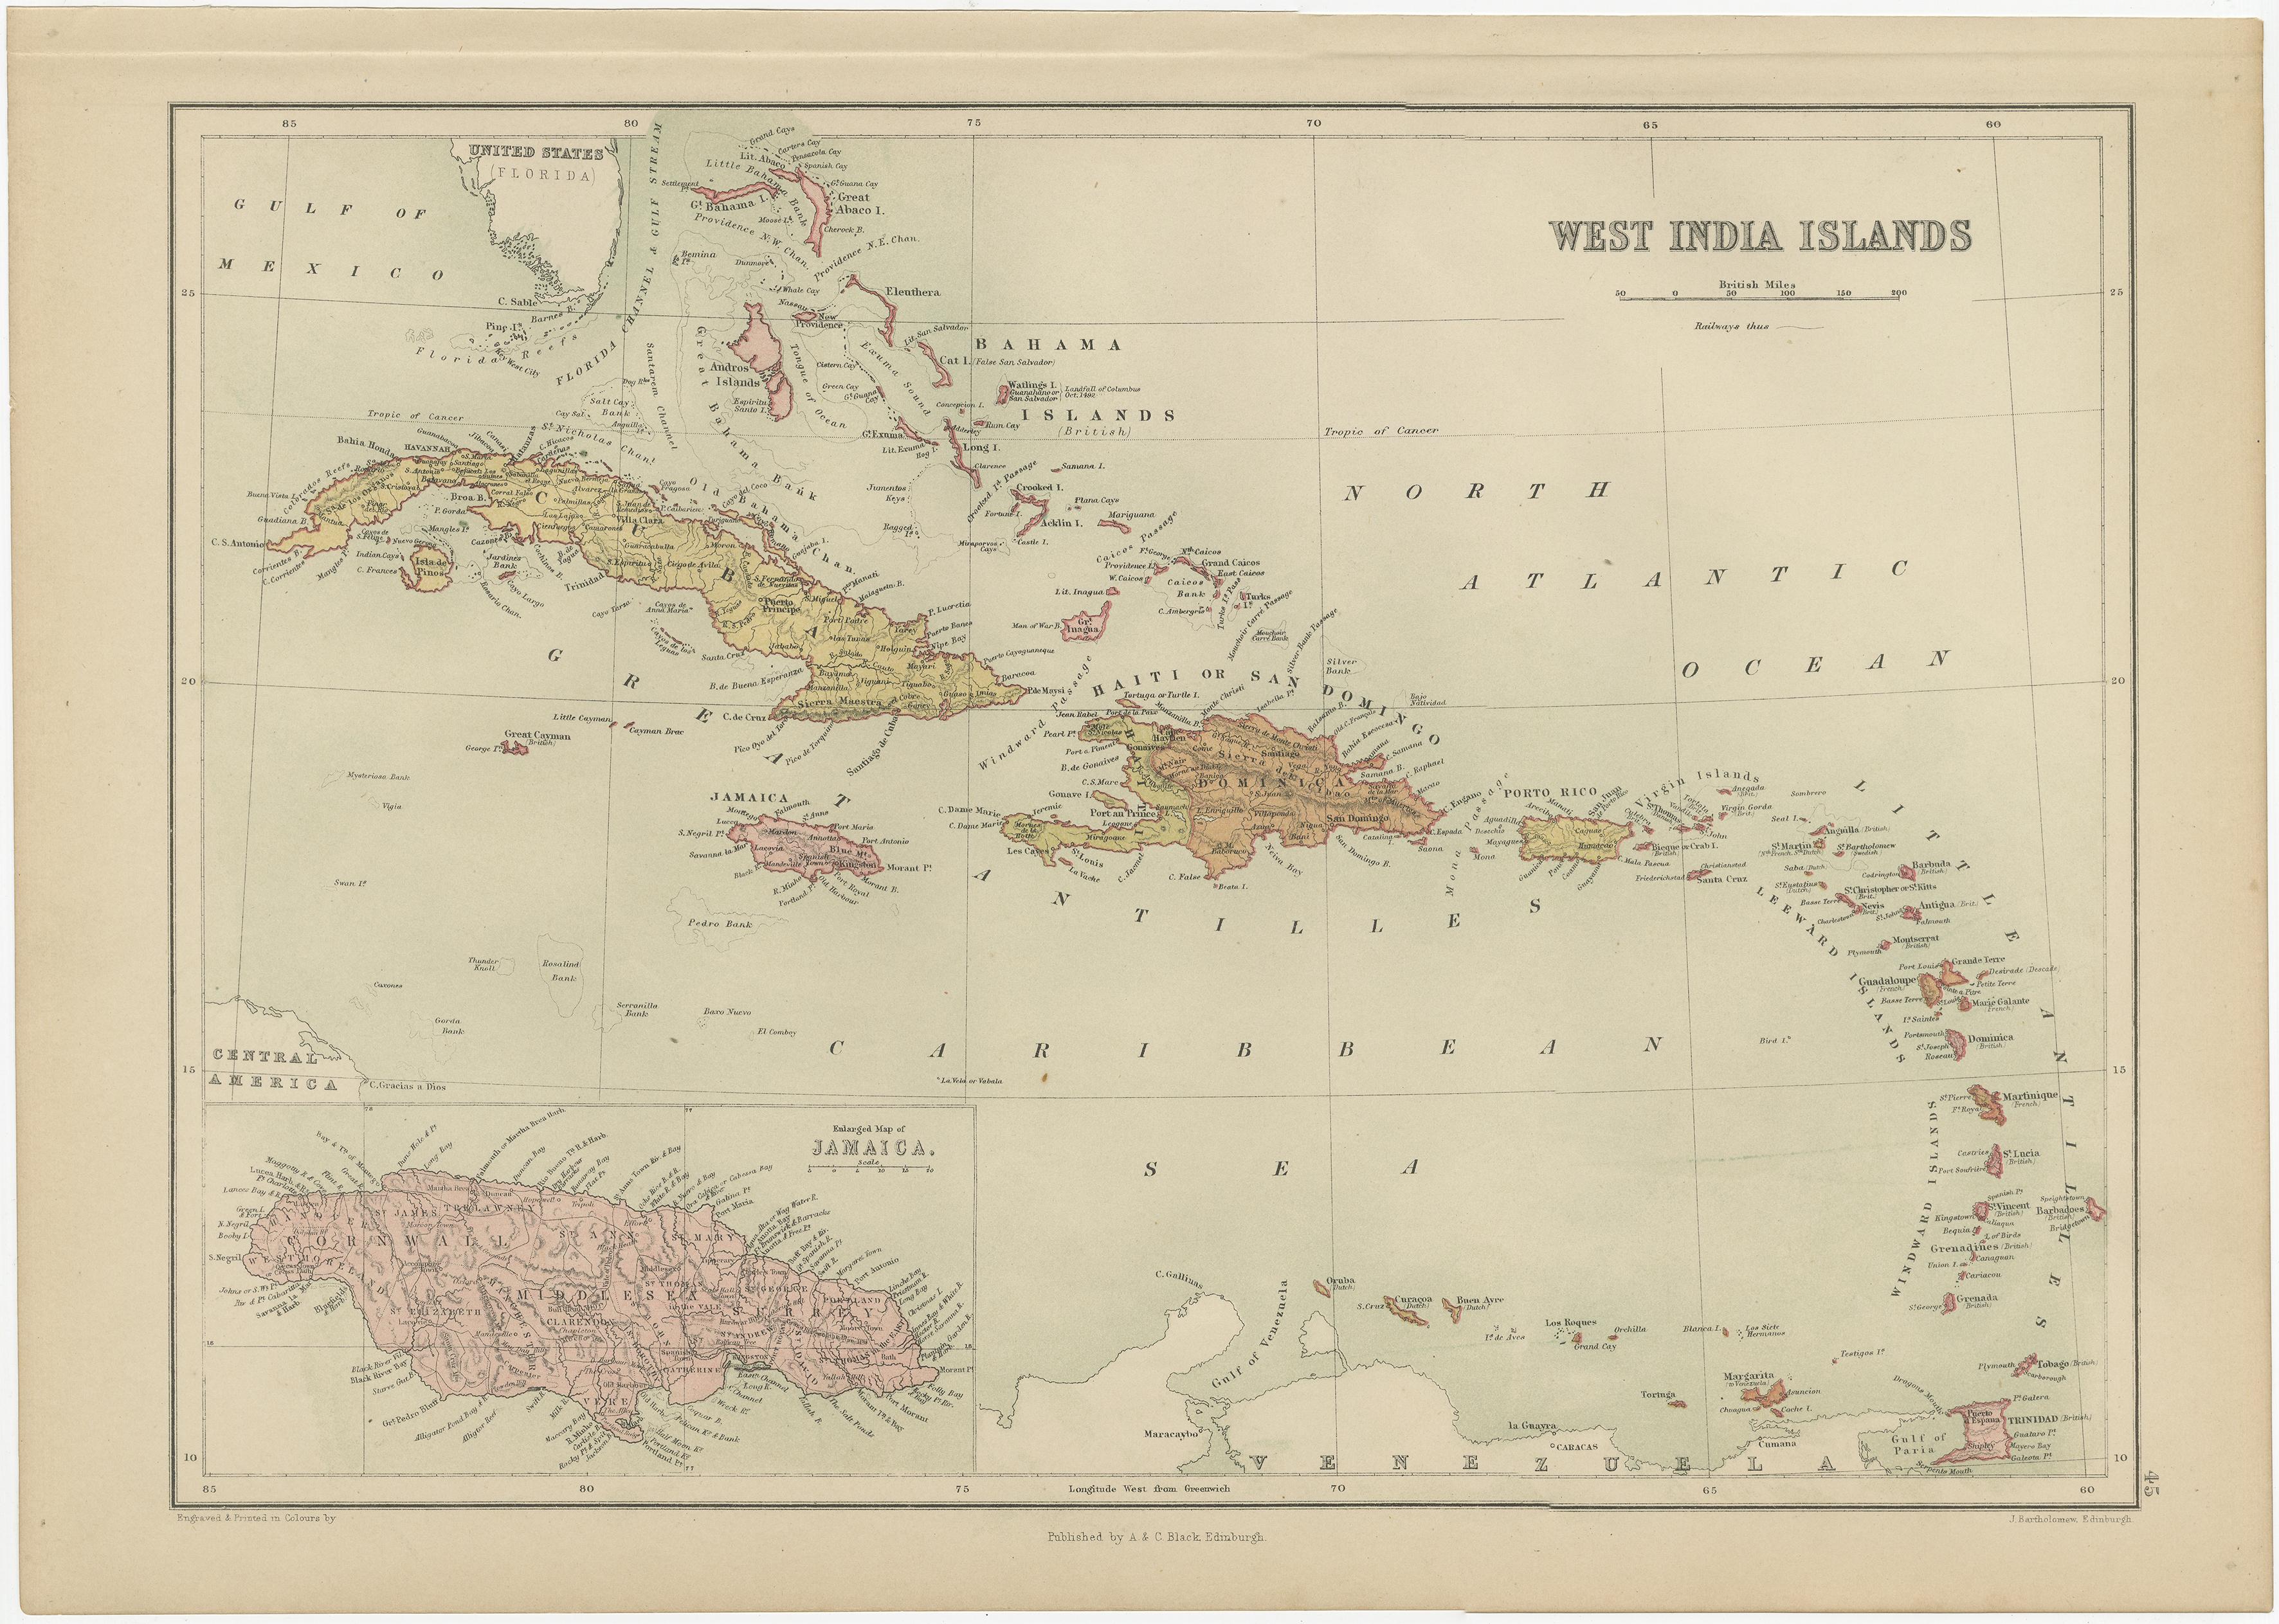 19th Century Antique Map of the West Indies by A & C, Black, 1870